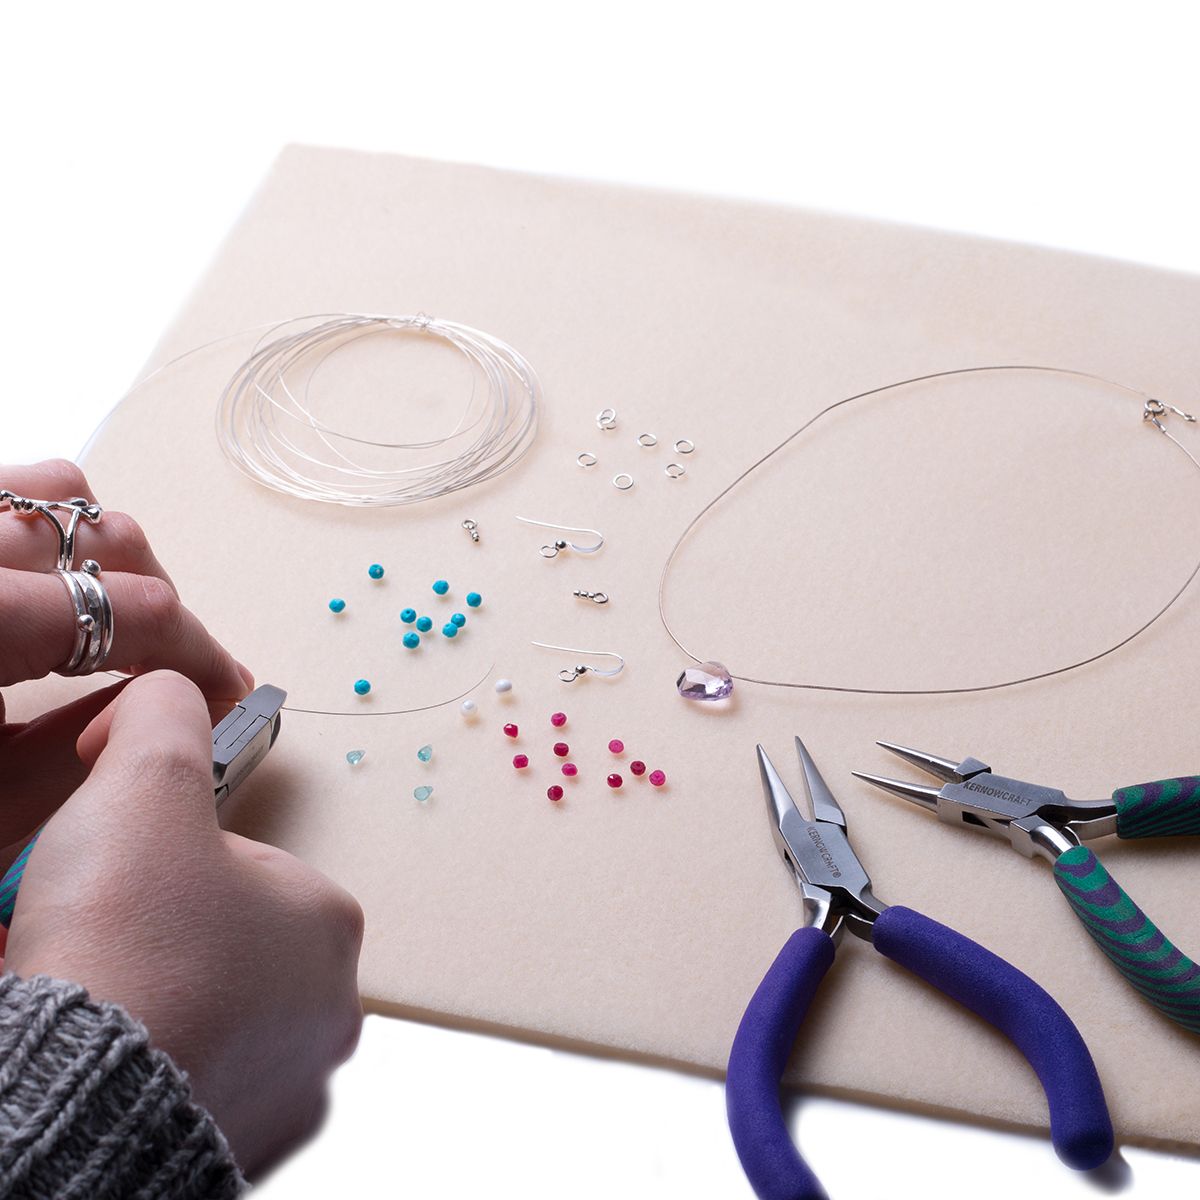 How to Start a Bracelet Making Business at Home: 8 Steps